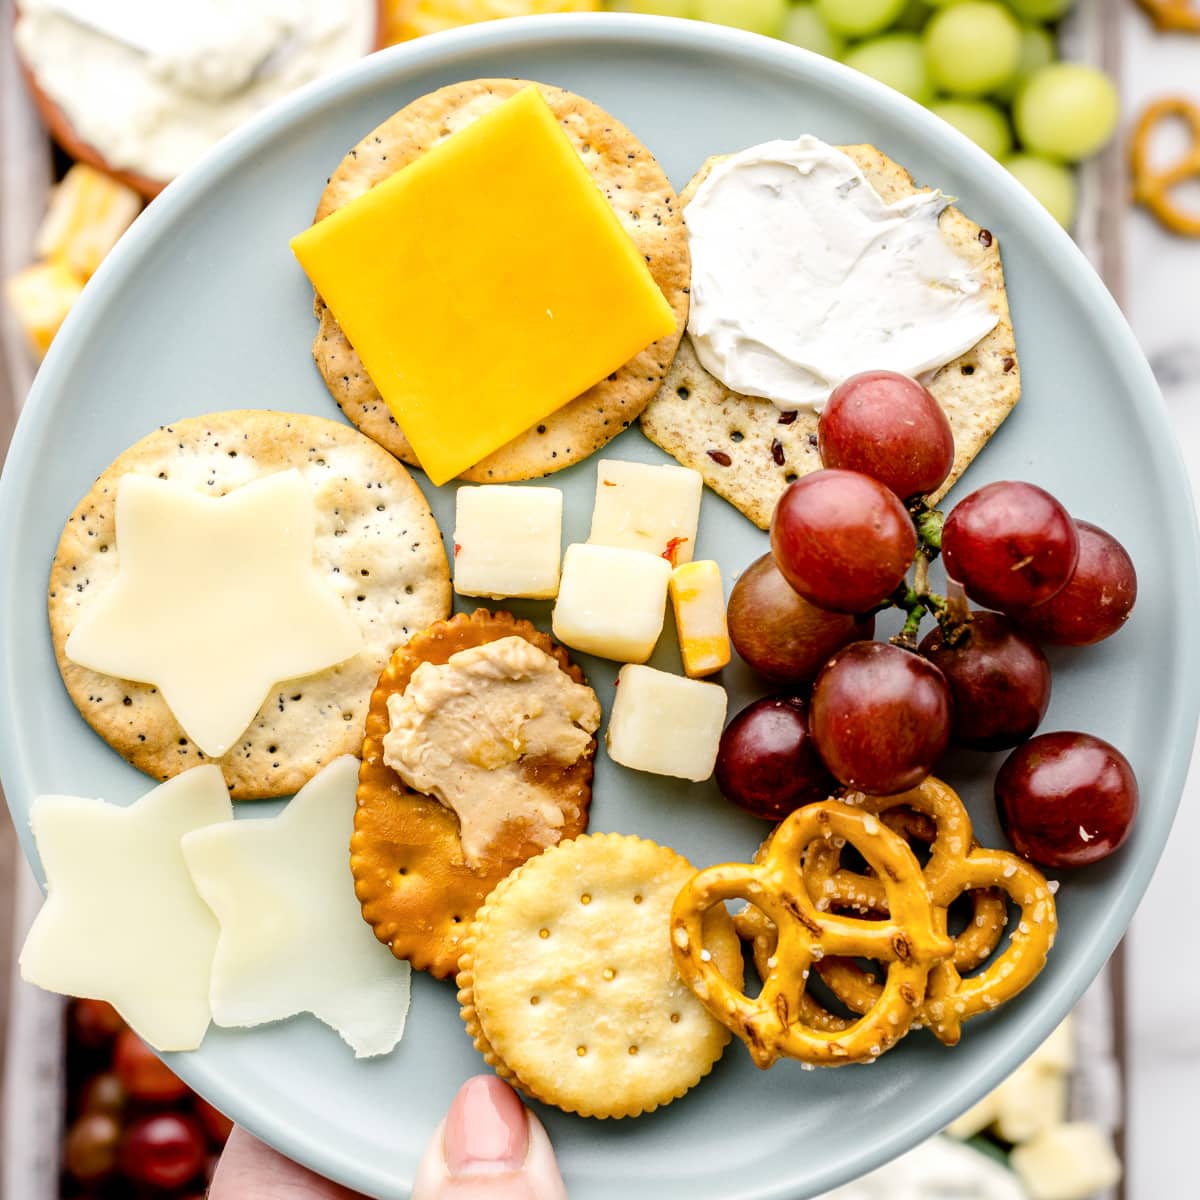 A plate filled with cheese and crackers form the board.